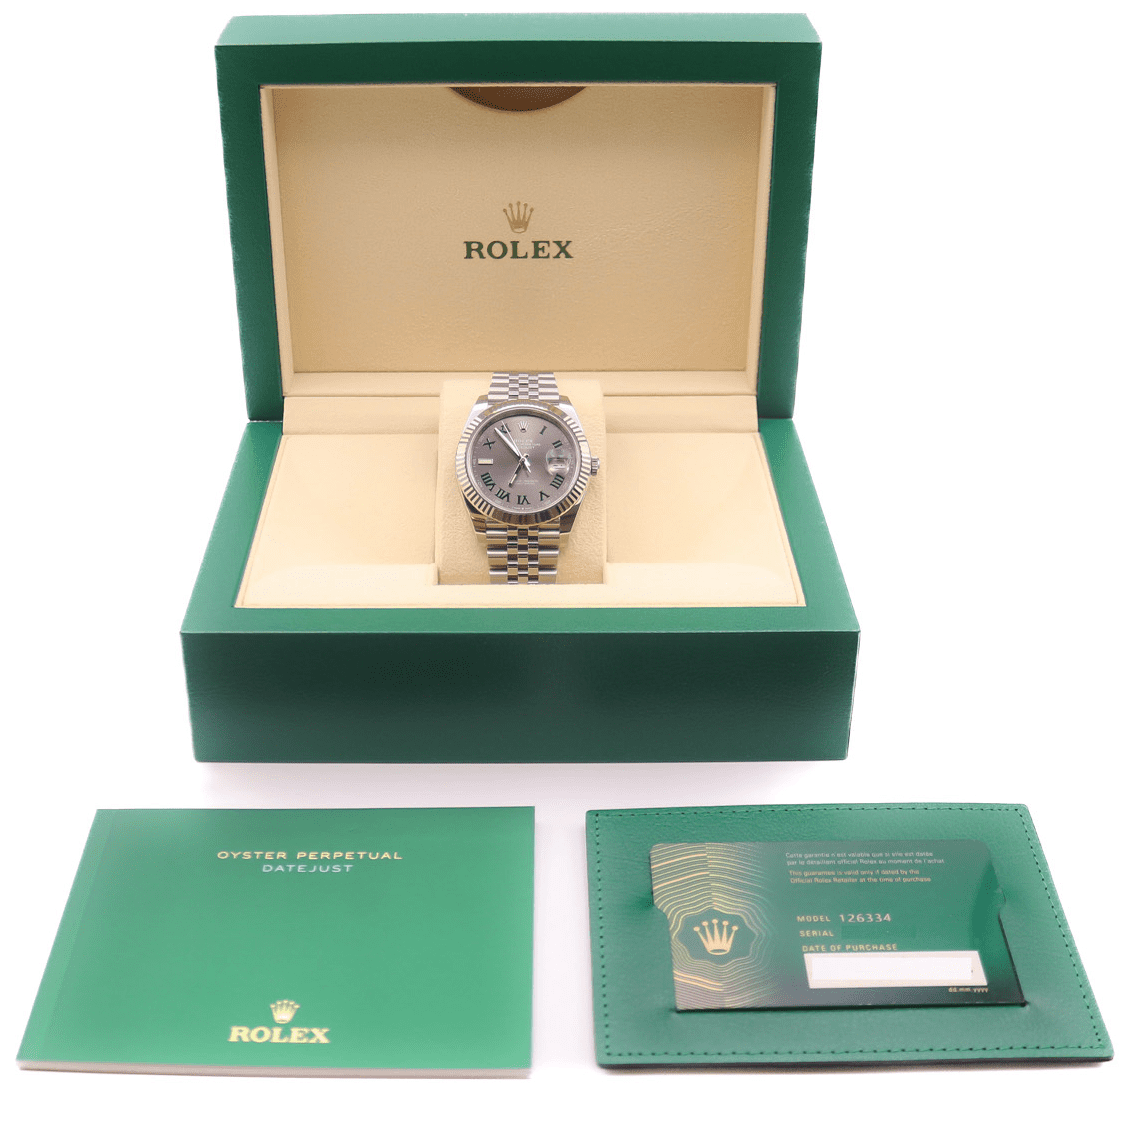 Rolex Datejust 41 in box with certicates